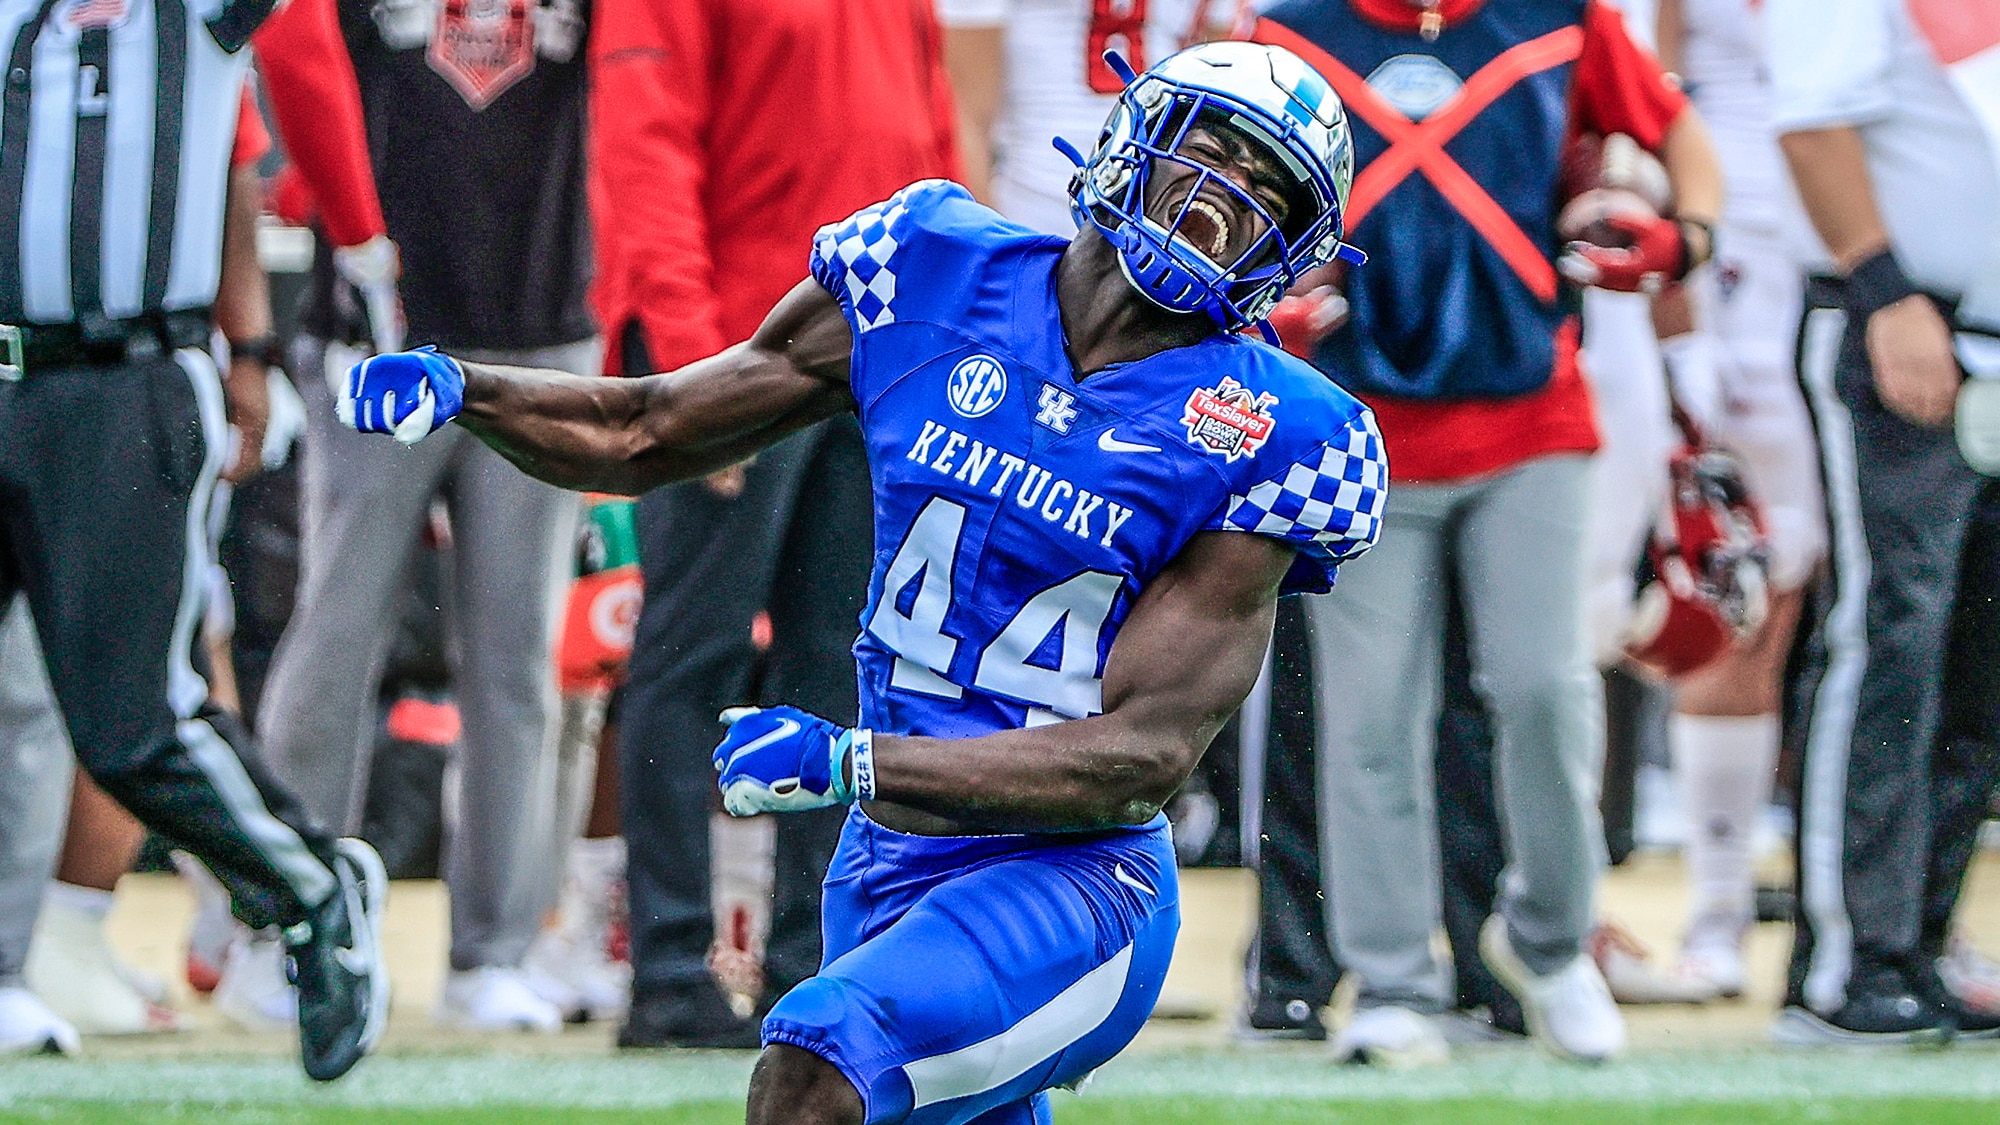 JACKSONVILLE, FLORIDA - JANUARY 02: Jamin Davis #44 of the Kentucky Wildcats celebrates a defensive stop against the North Carolina State Wolfpack during the TaxSlayer Gator Bowl at TIAA Bank Field on January 02, 2021 in Jacksonville, Florida.